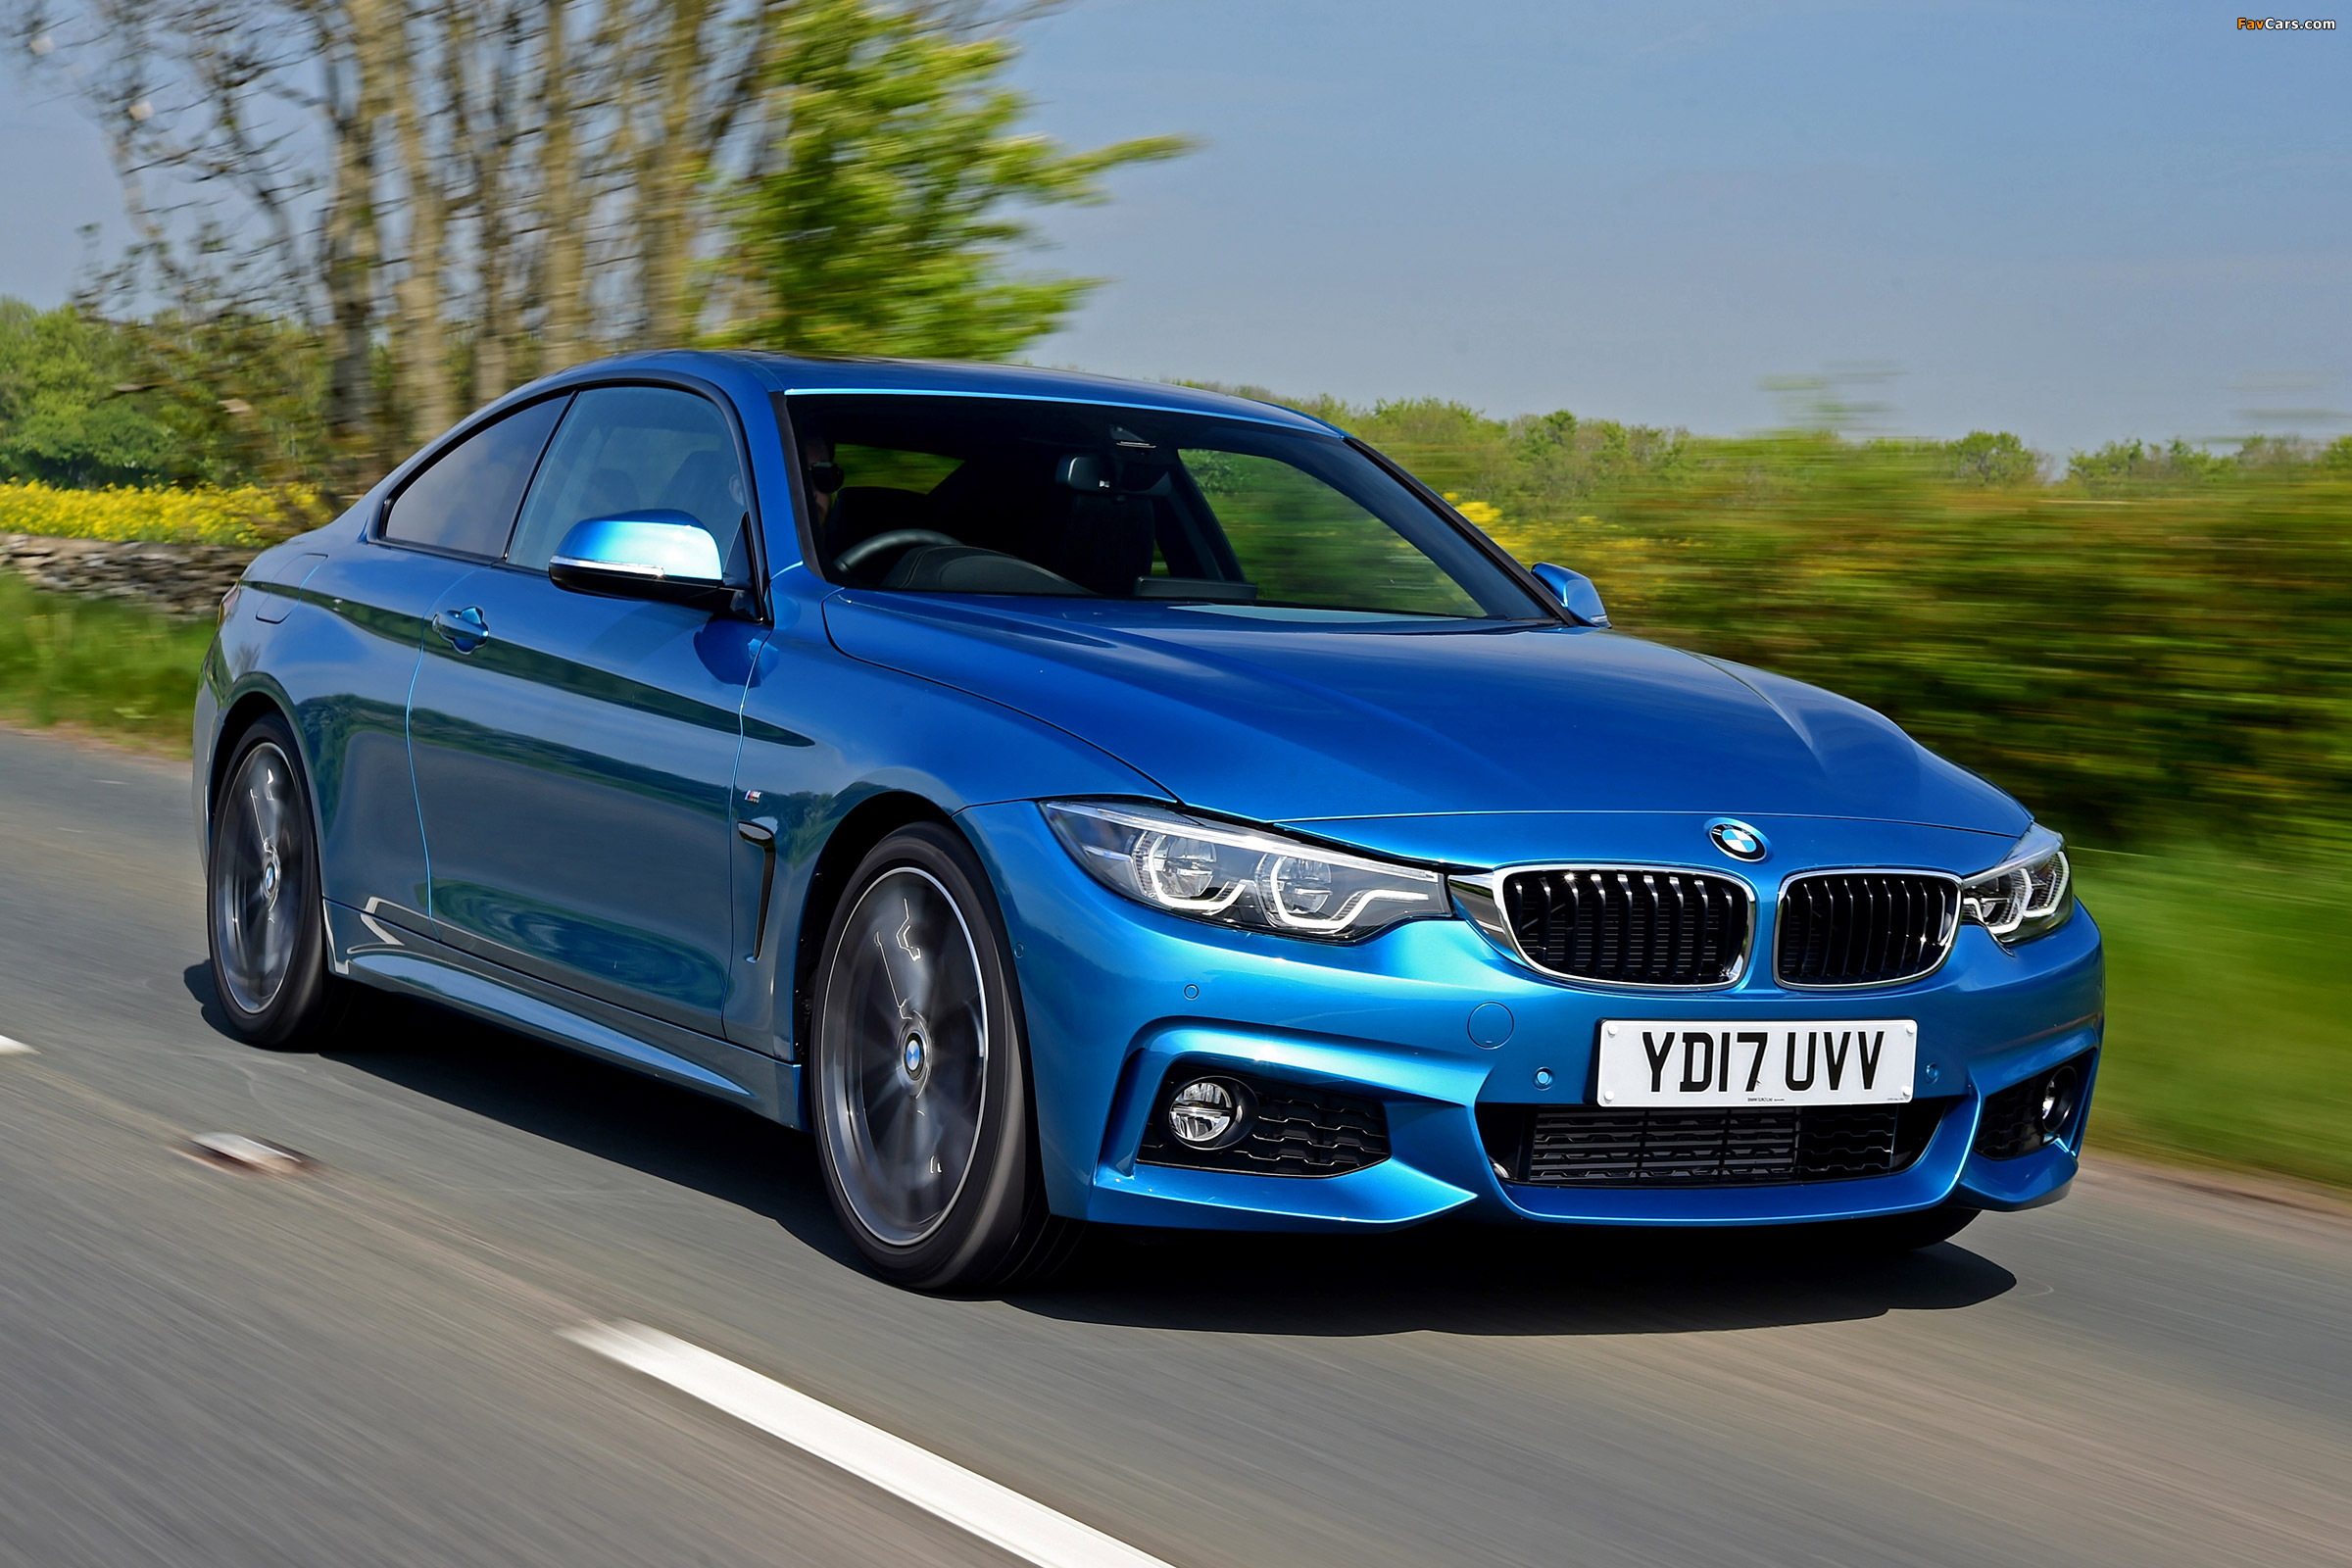 Pictures of BMW 420d Coup 233 M Sport UK spec F32 2017 2400x1600 